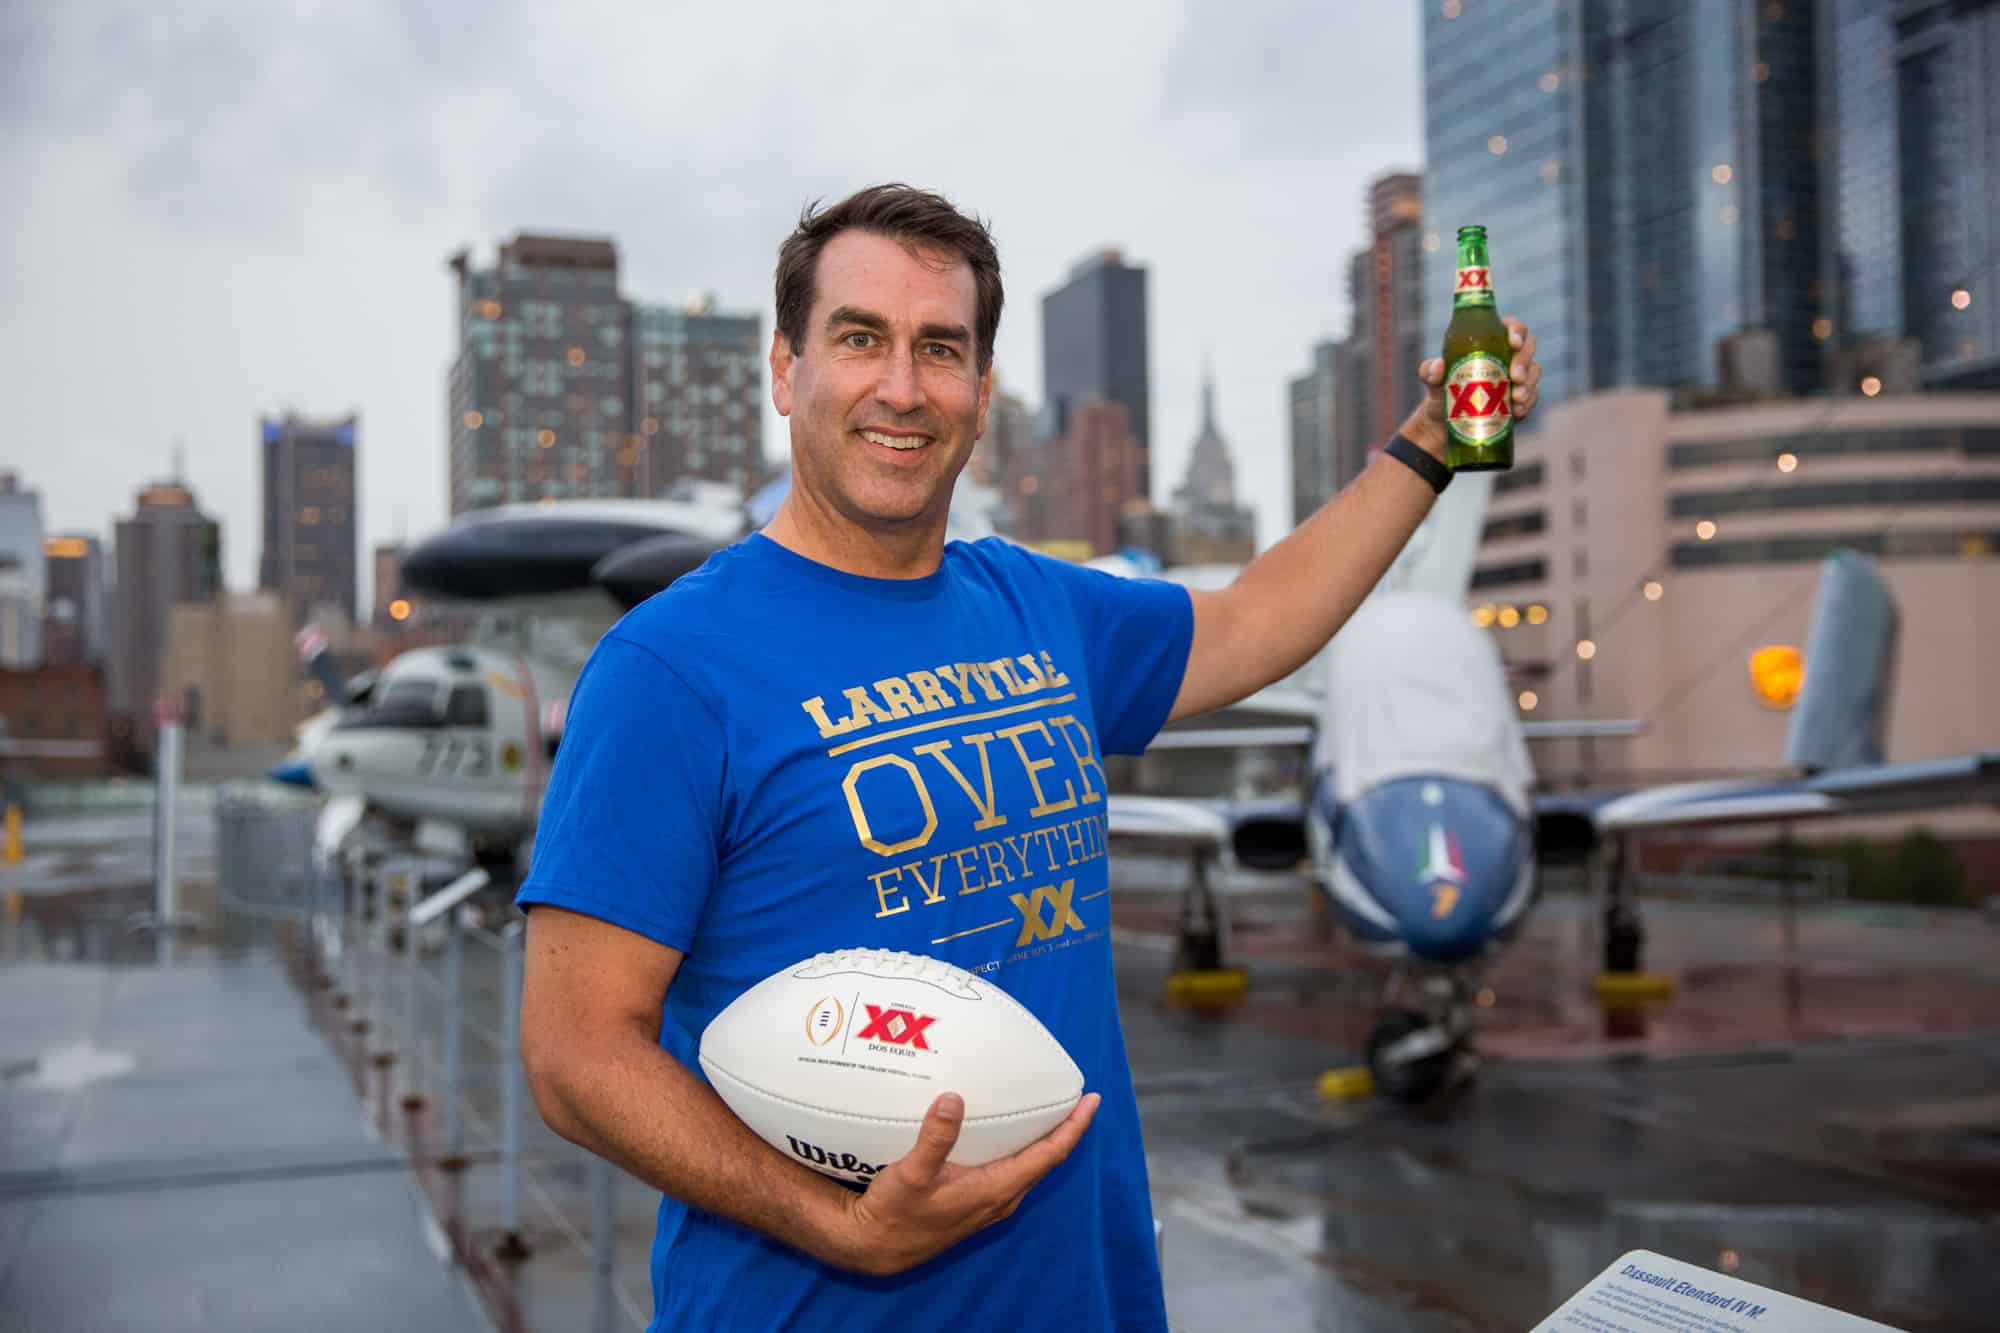 Ron Riggle posing with Dos Equis beer